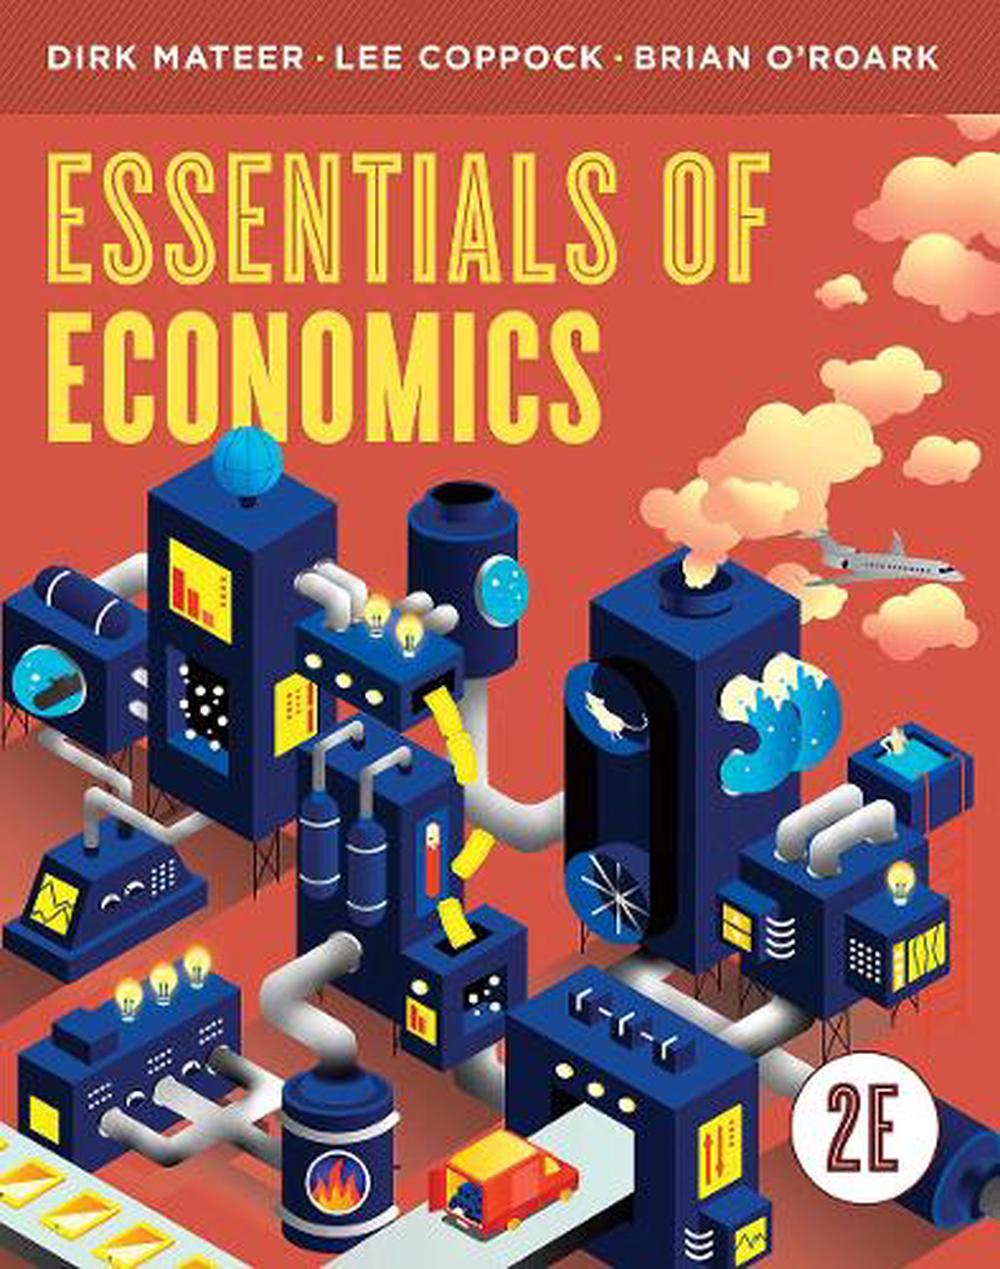 Nile　Paperback,　The　Economics,　Essentials　Dirk　9780393441864　online　2nd　by　at　Mateer,　Buy　of　Edition